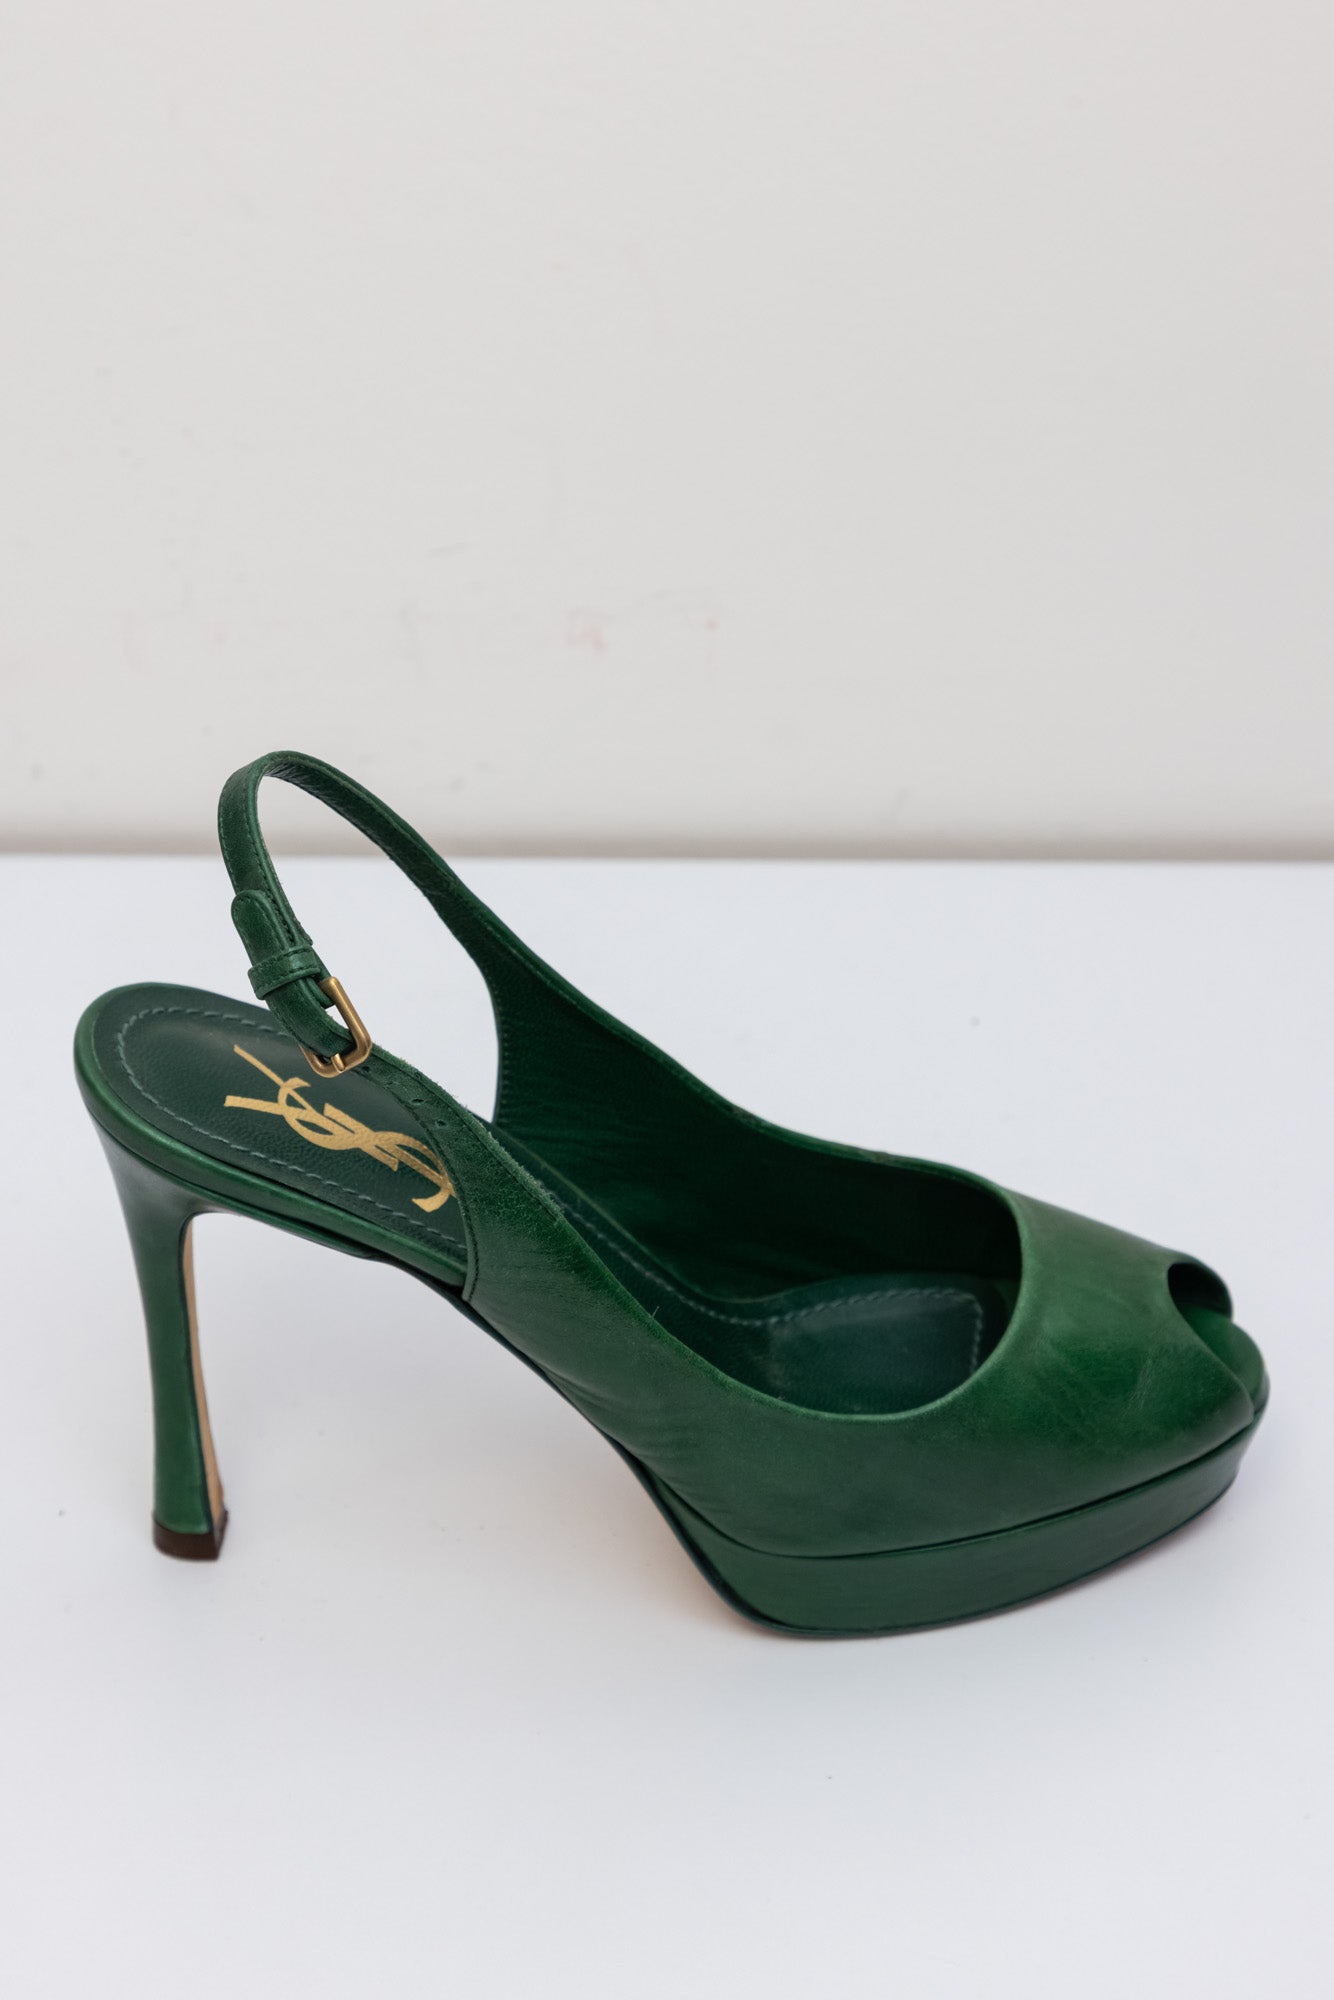 YVES SAINT LAURENT Green Leather Sling-back Pumps Heels | Size IT 37 | Made in Italy